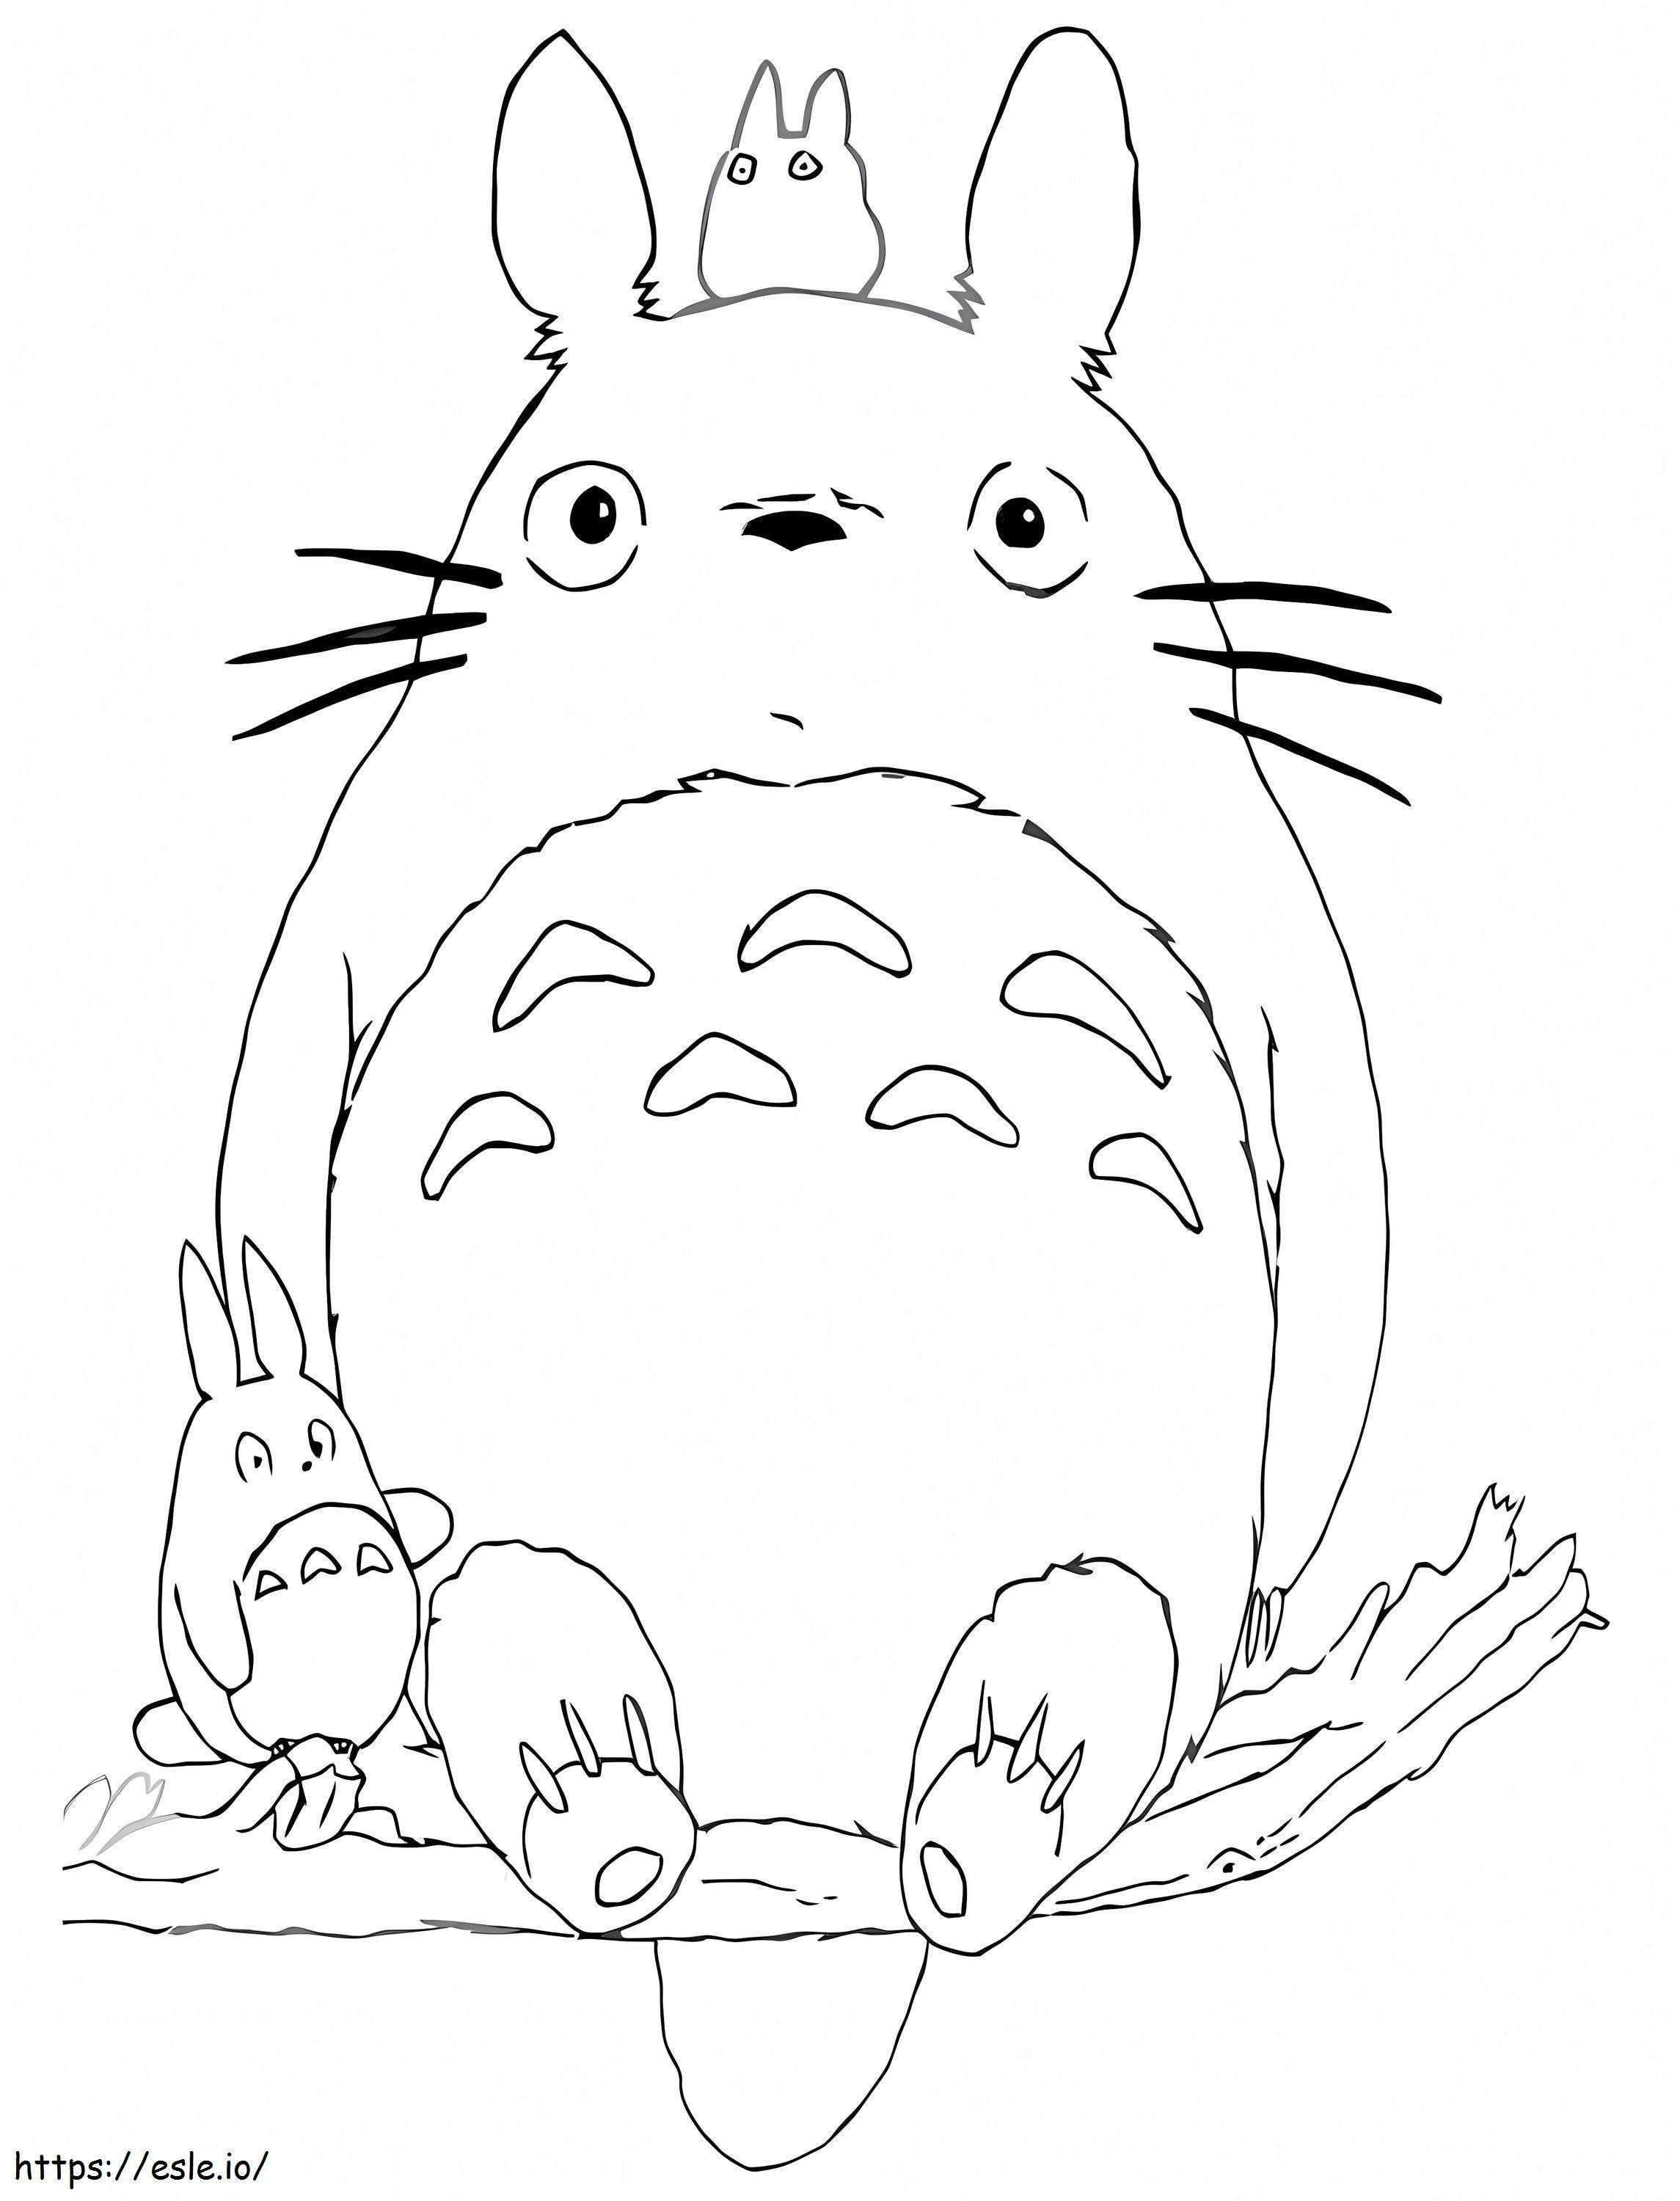 Adorable Sitting Totoro coloring page